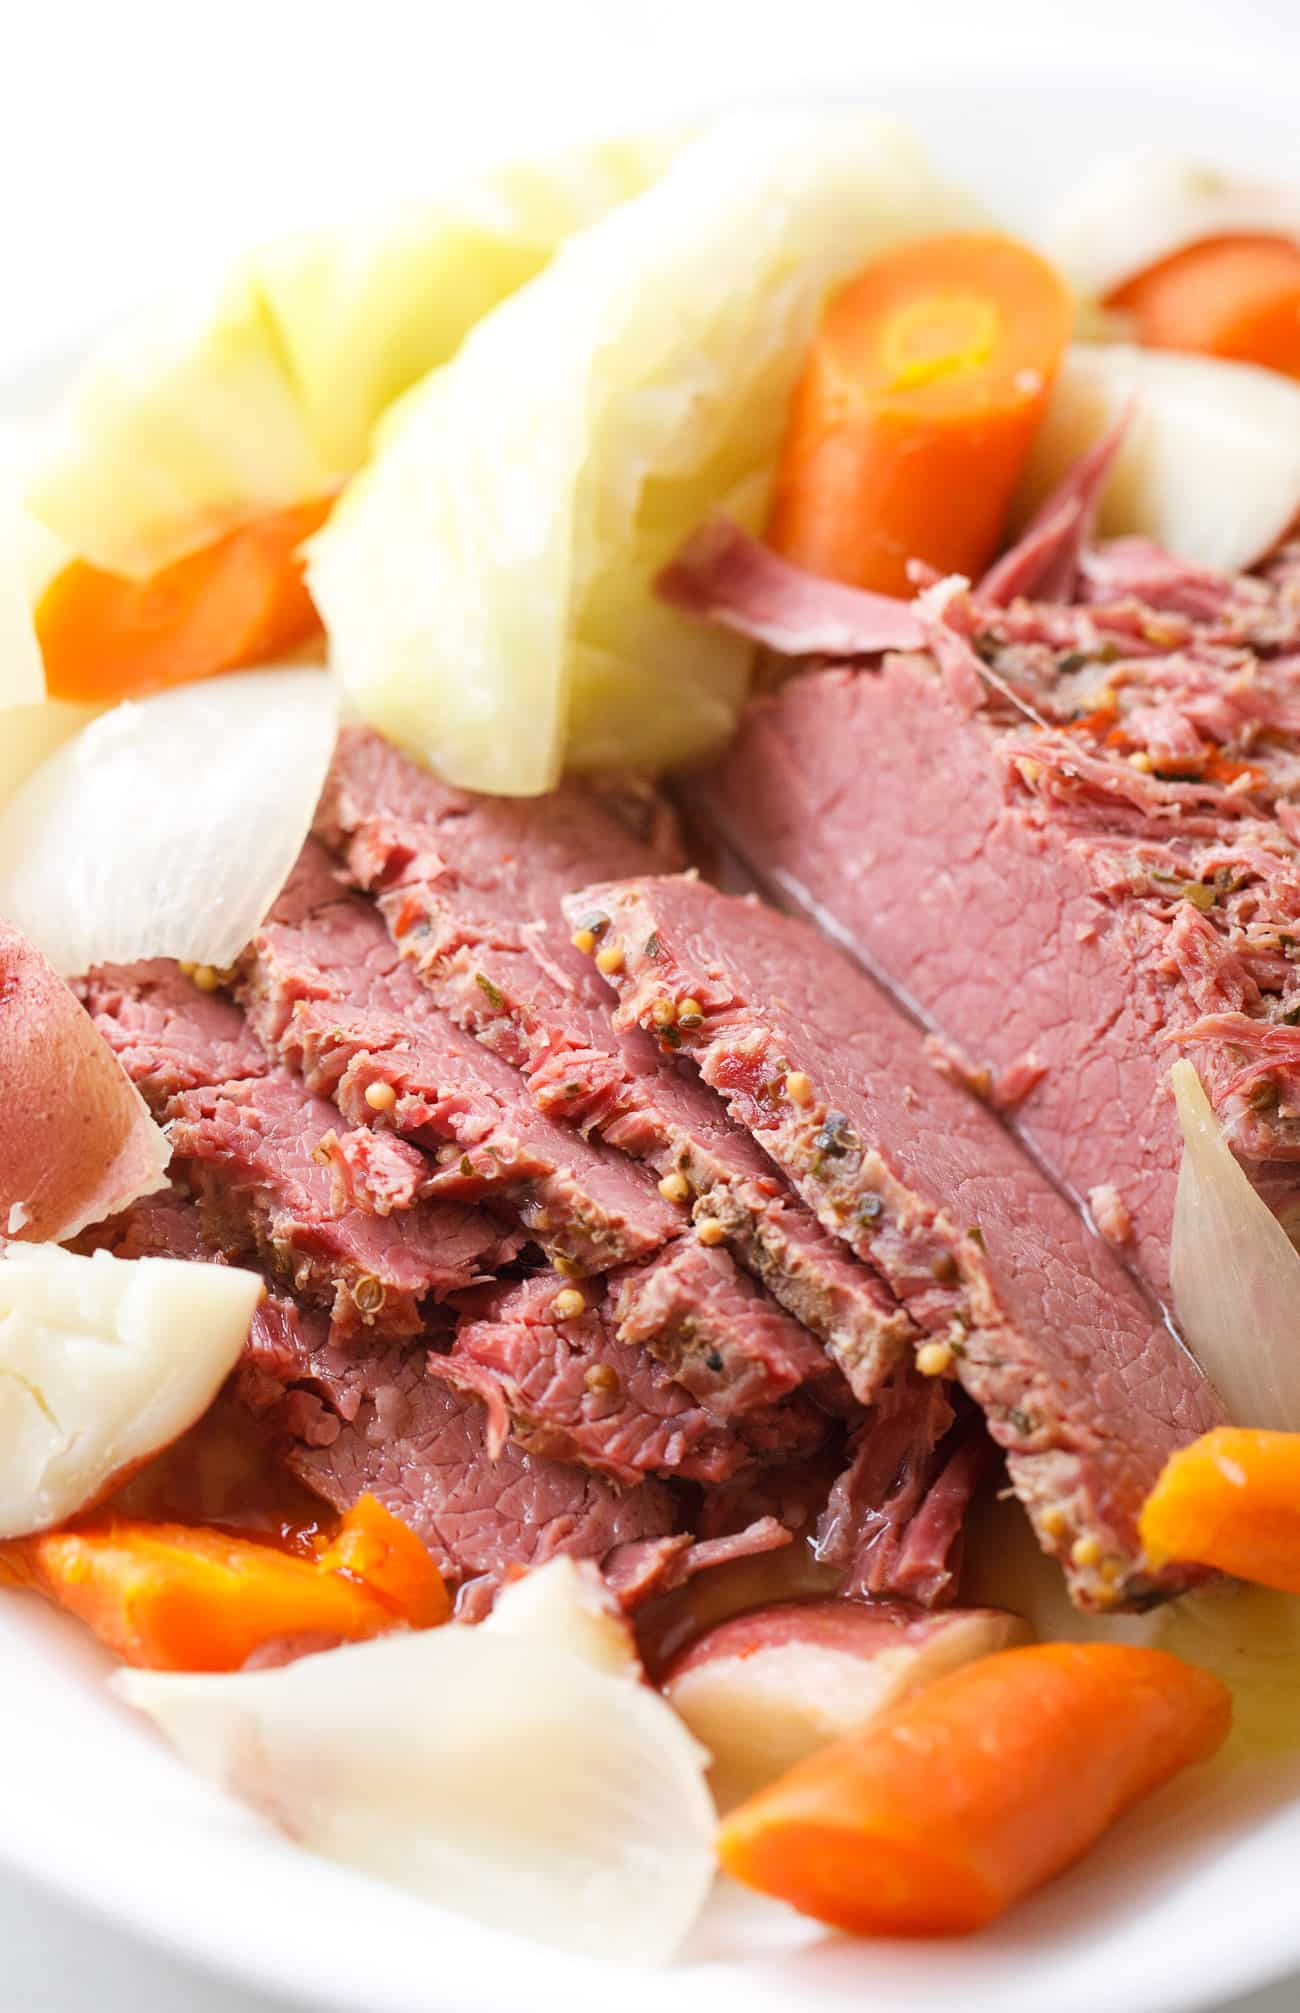 Pressure Cook Corned Beef And Cabbage
 Instant Pot Corned Beef and Cabbage Pressure Cooker